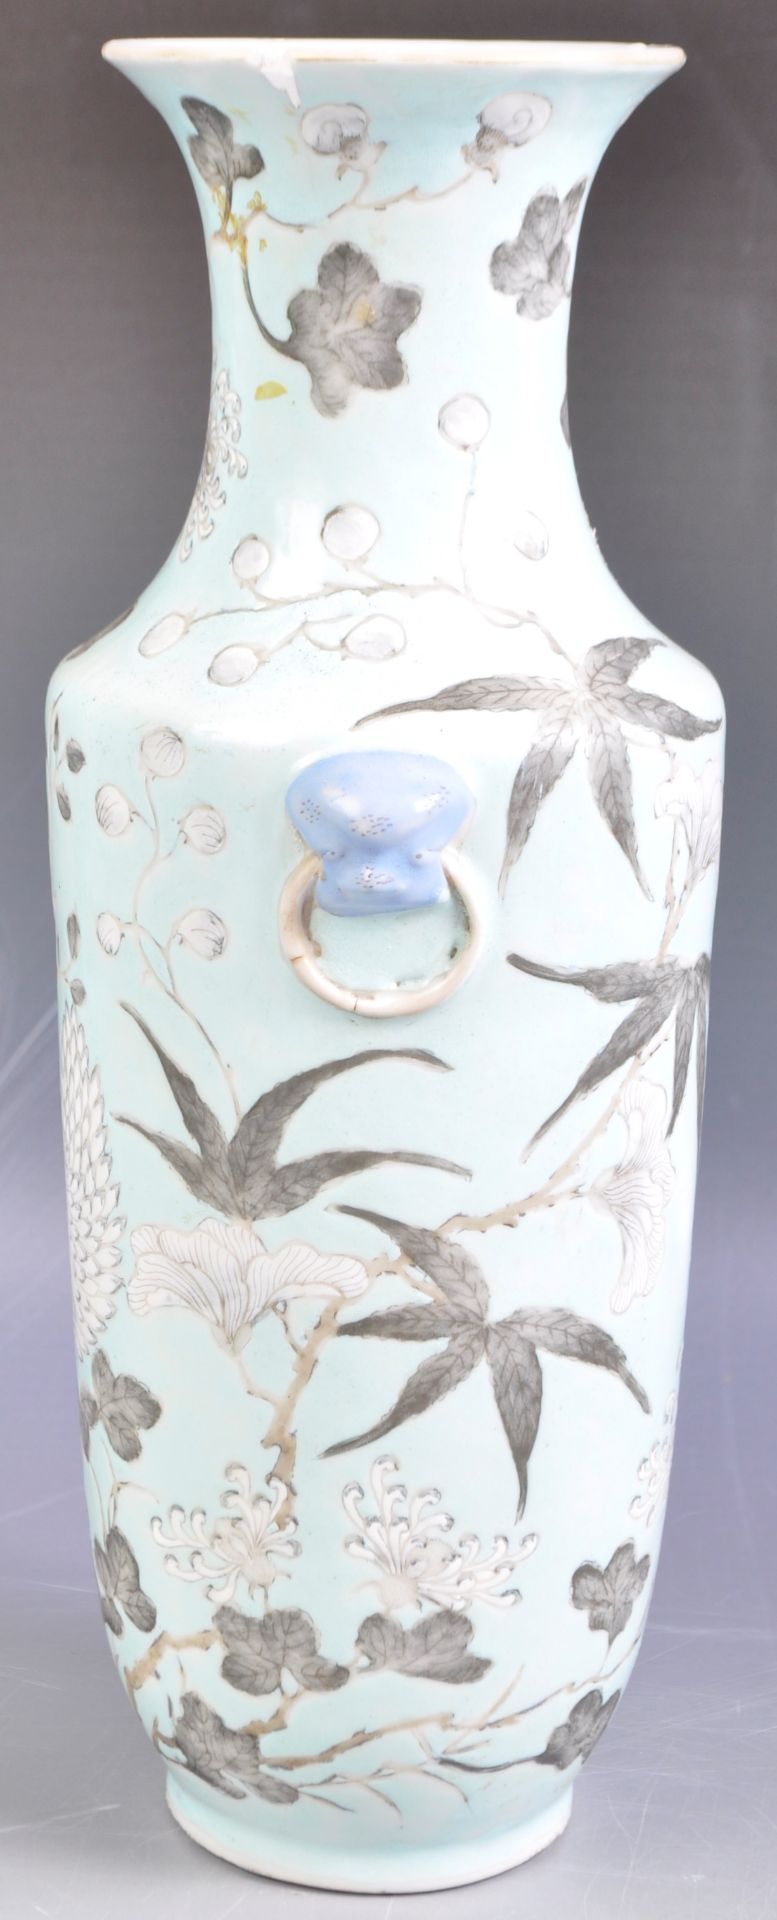 ANTIQUE 19TH CENTURY CHINESE PORCELAIN ROULEAU VASE IN TEAL - Image 4 of 7